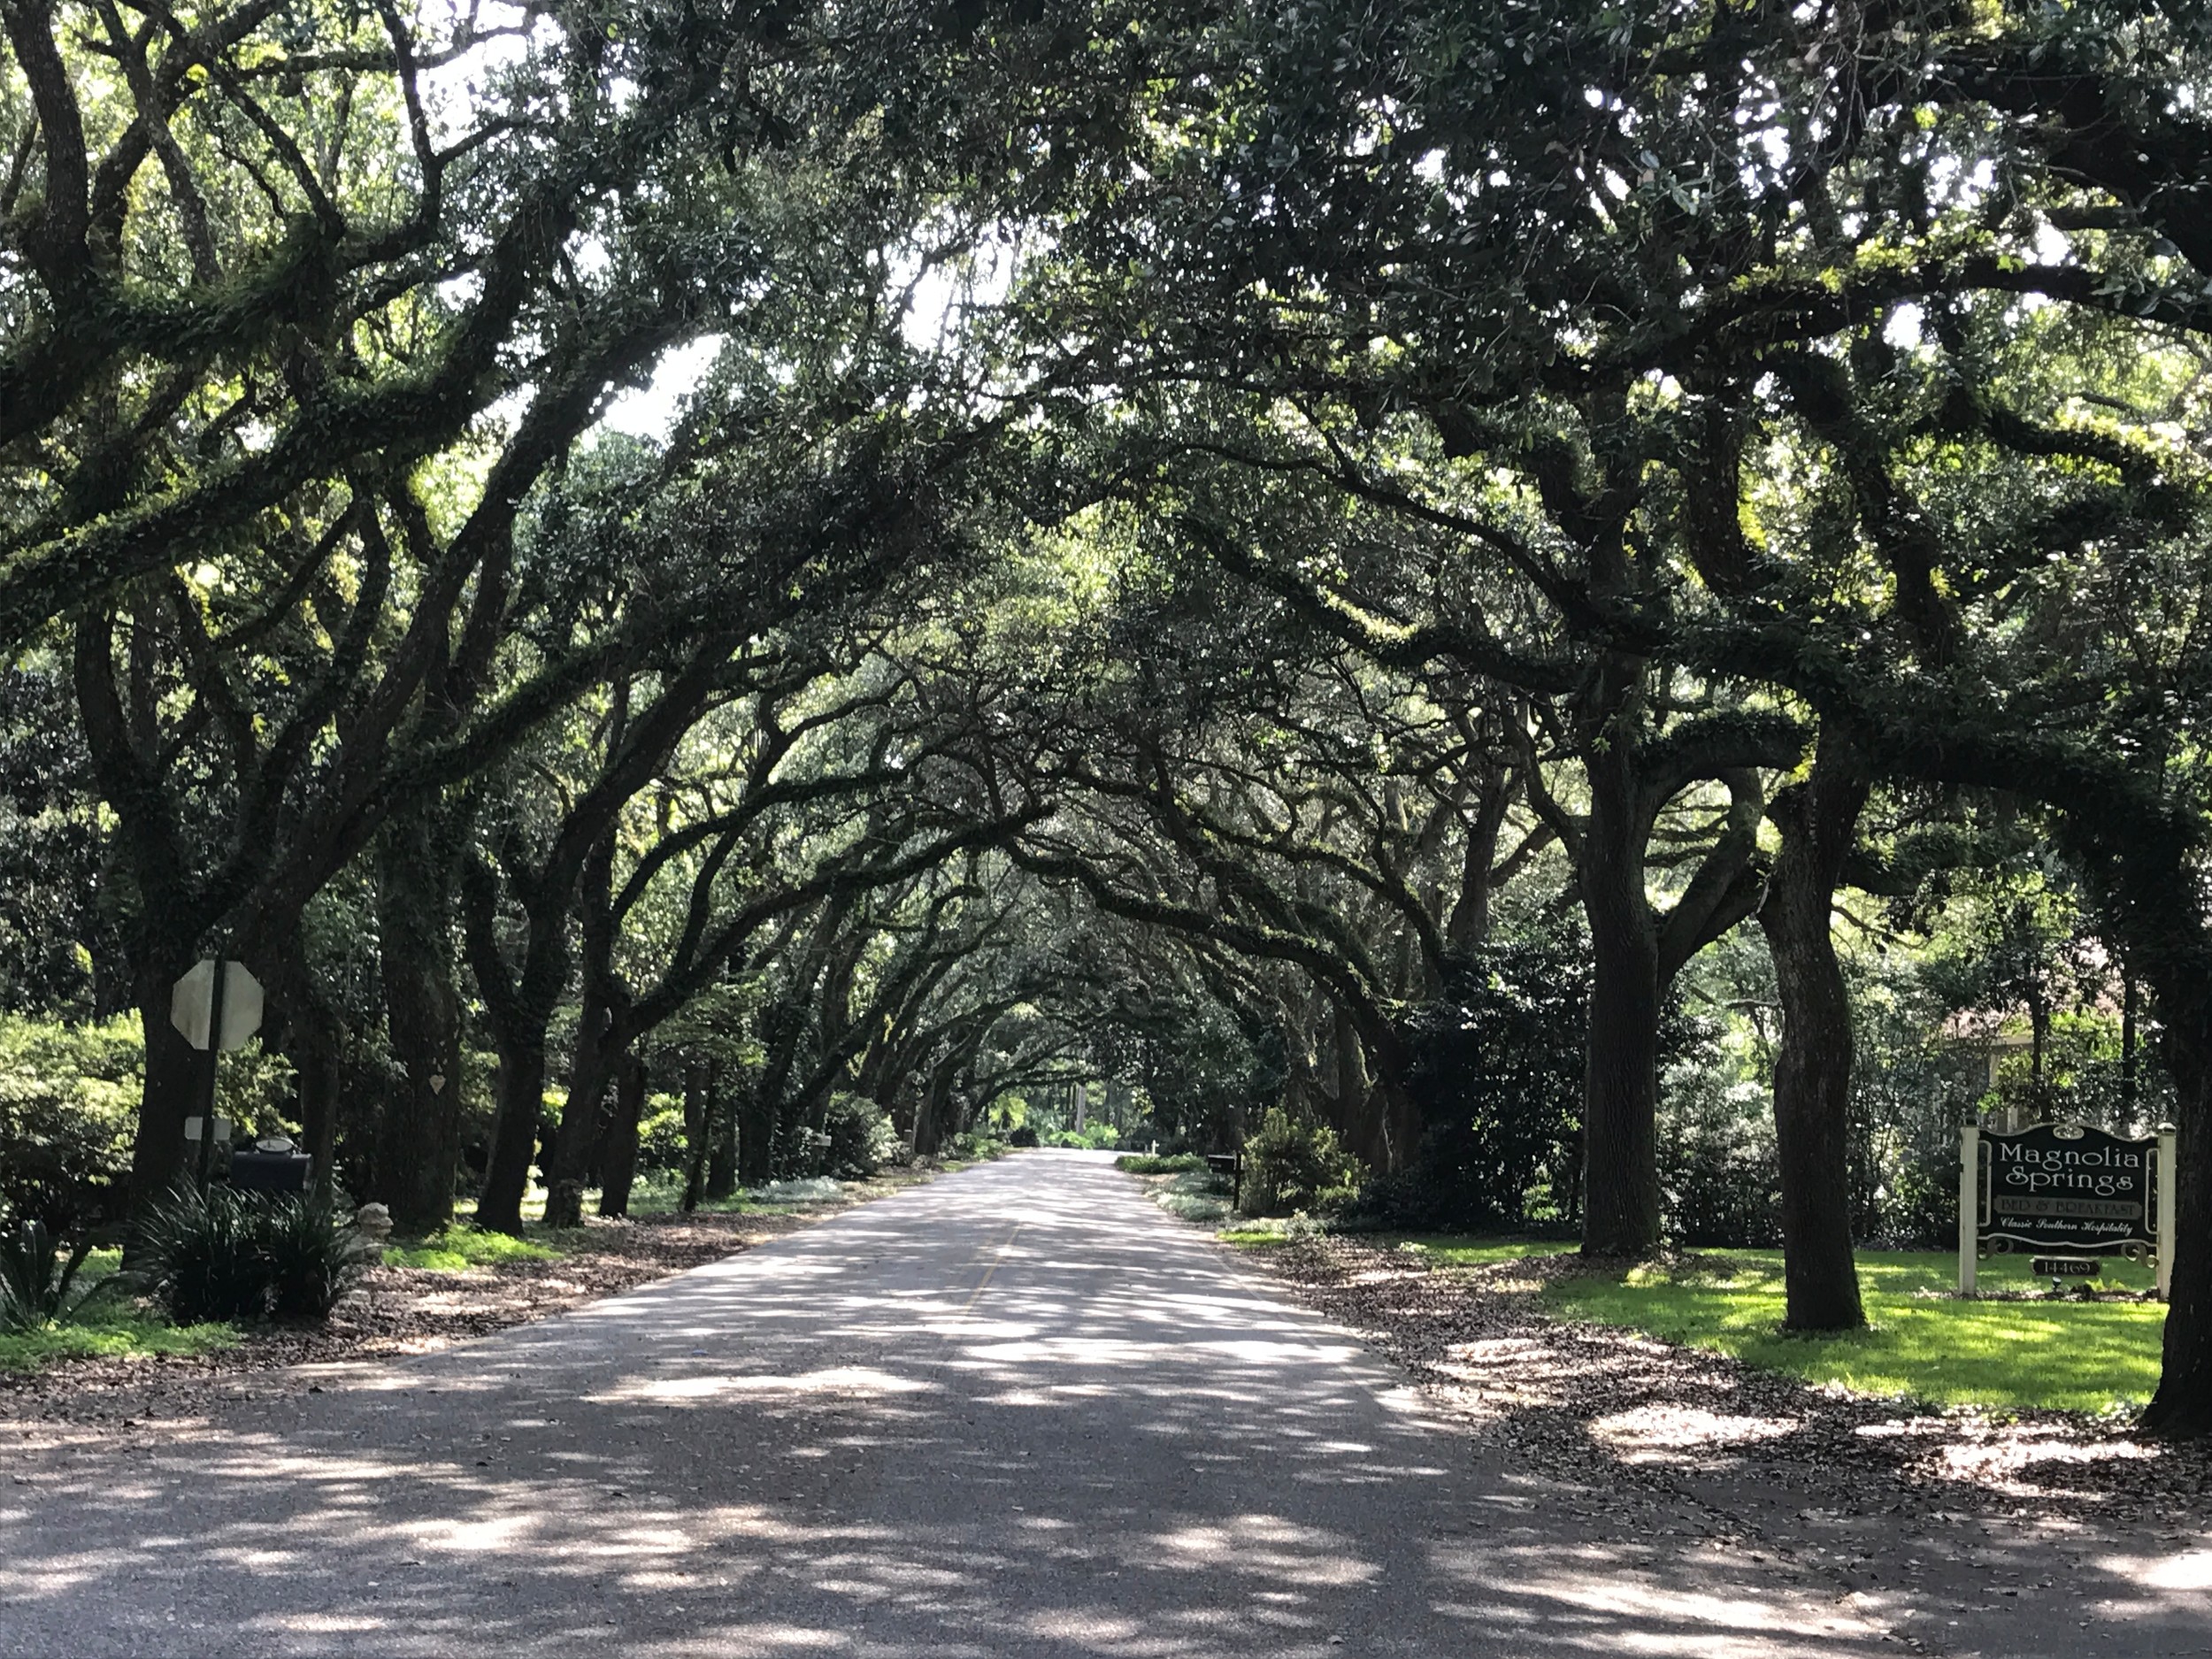 The Magnolia Springs town council hopes that the Tatum wedding could lead way to seeing even more weddings taking place on Oak Street, shown here, and possibly other locations in Magnolia Springs.